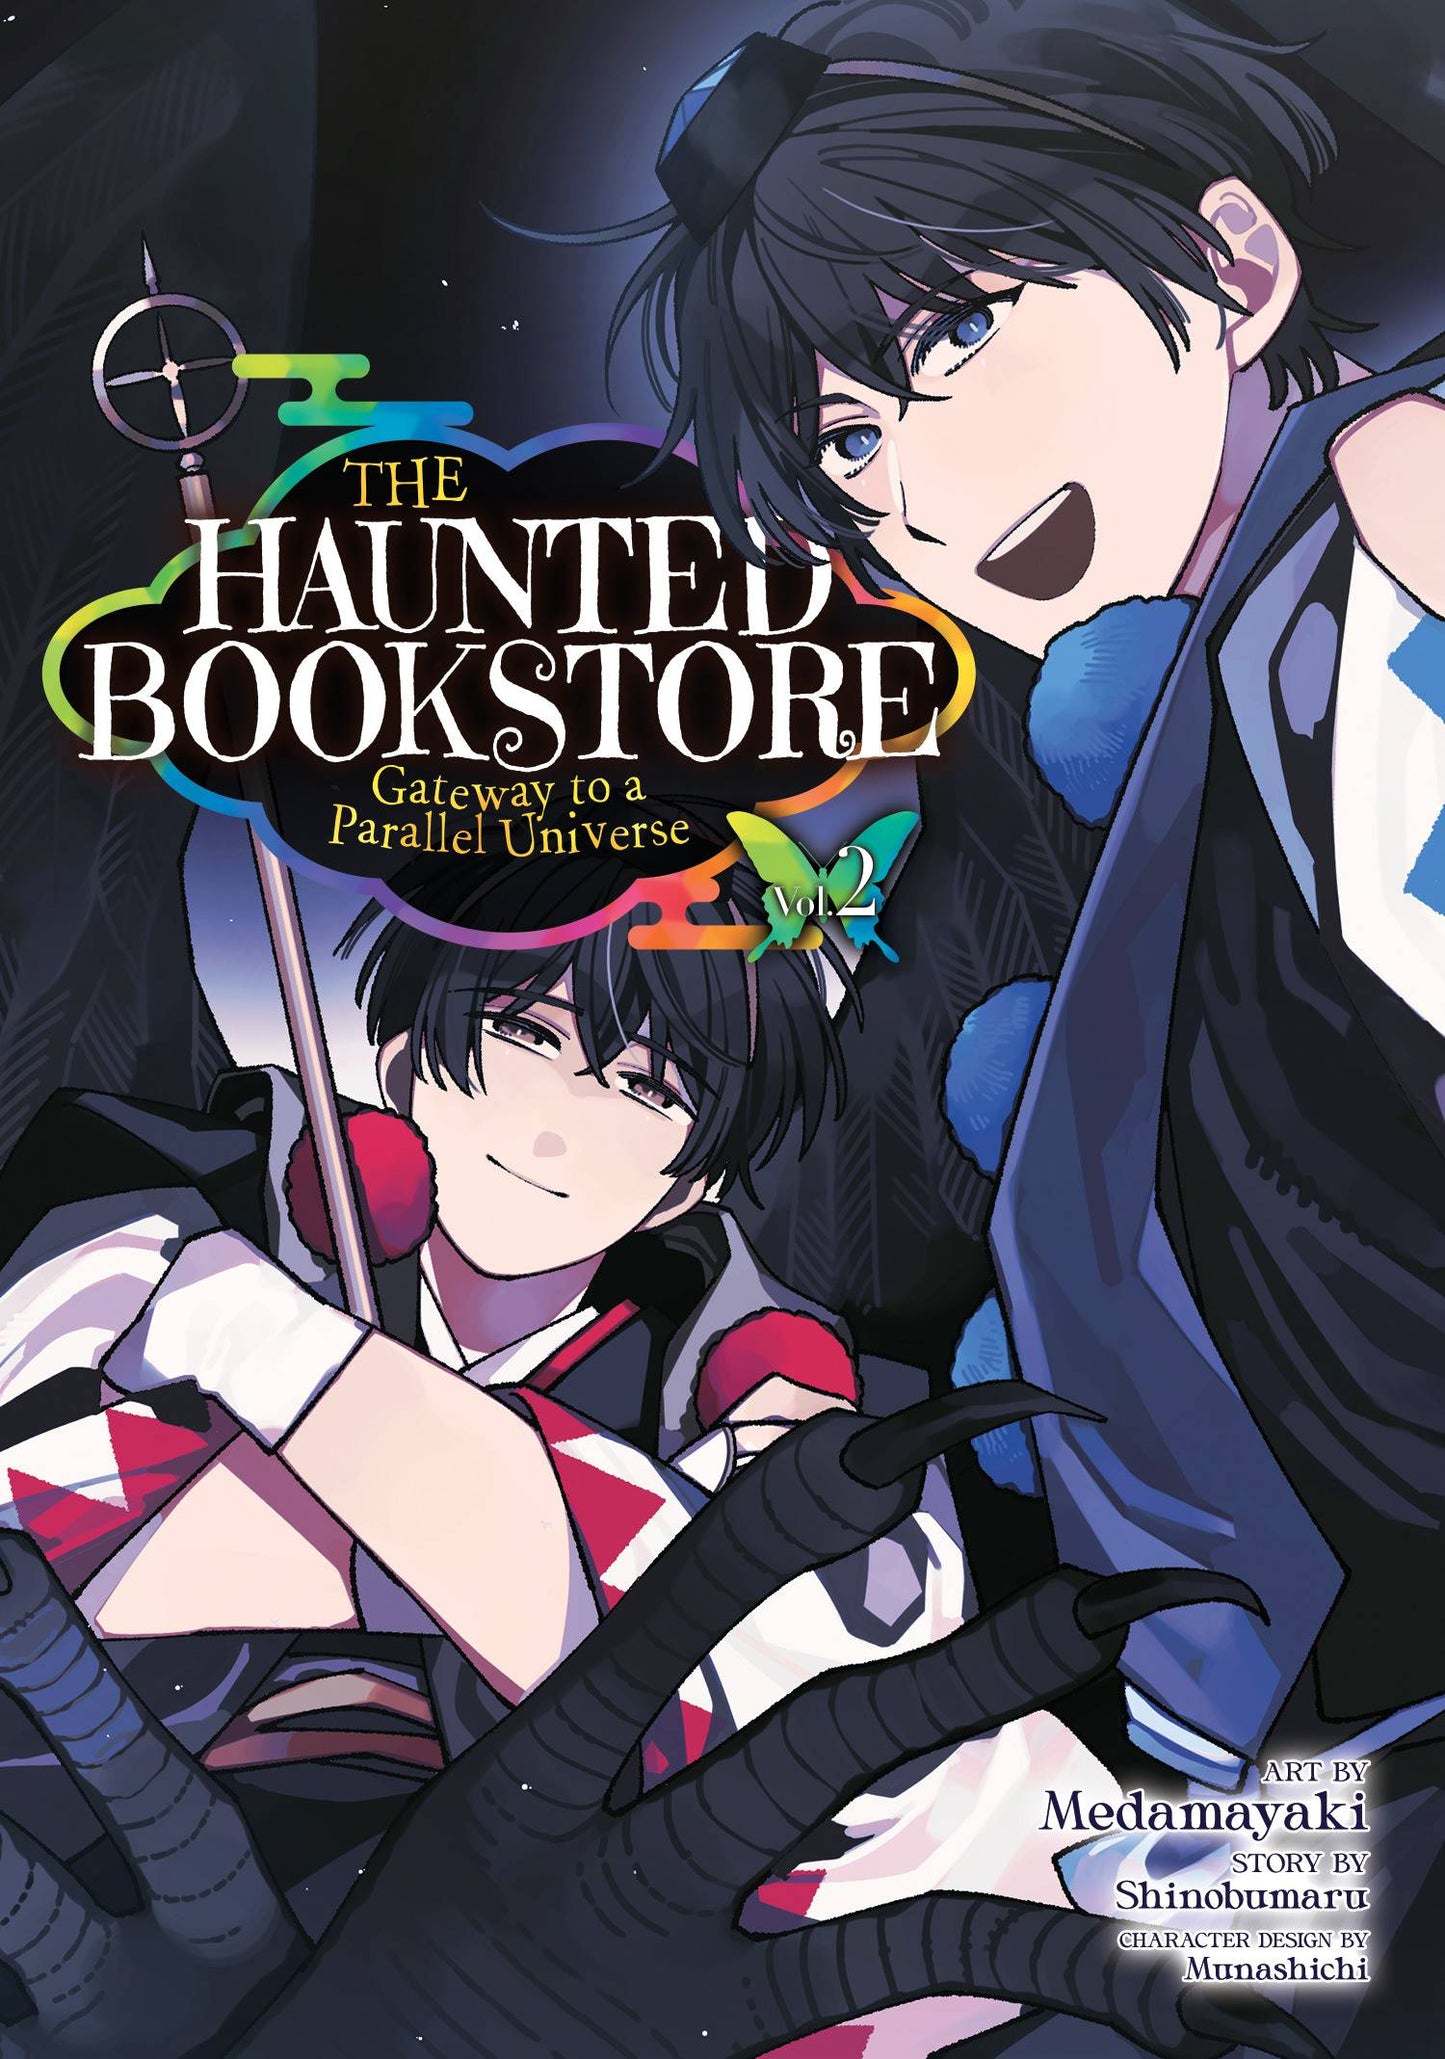 The Haunted Bookstore - Gateway to a Parallel Universe Vol. 02